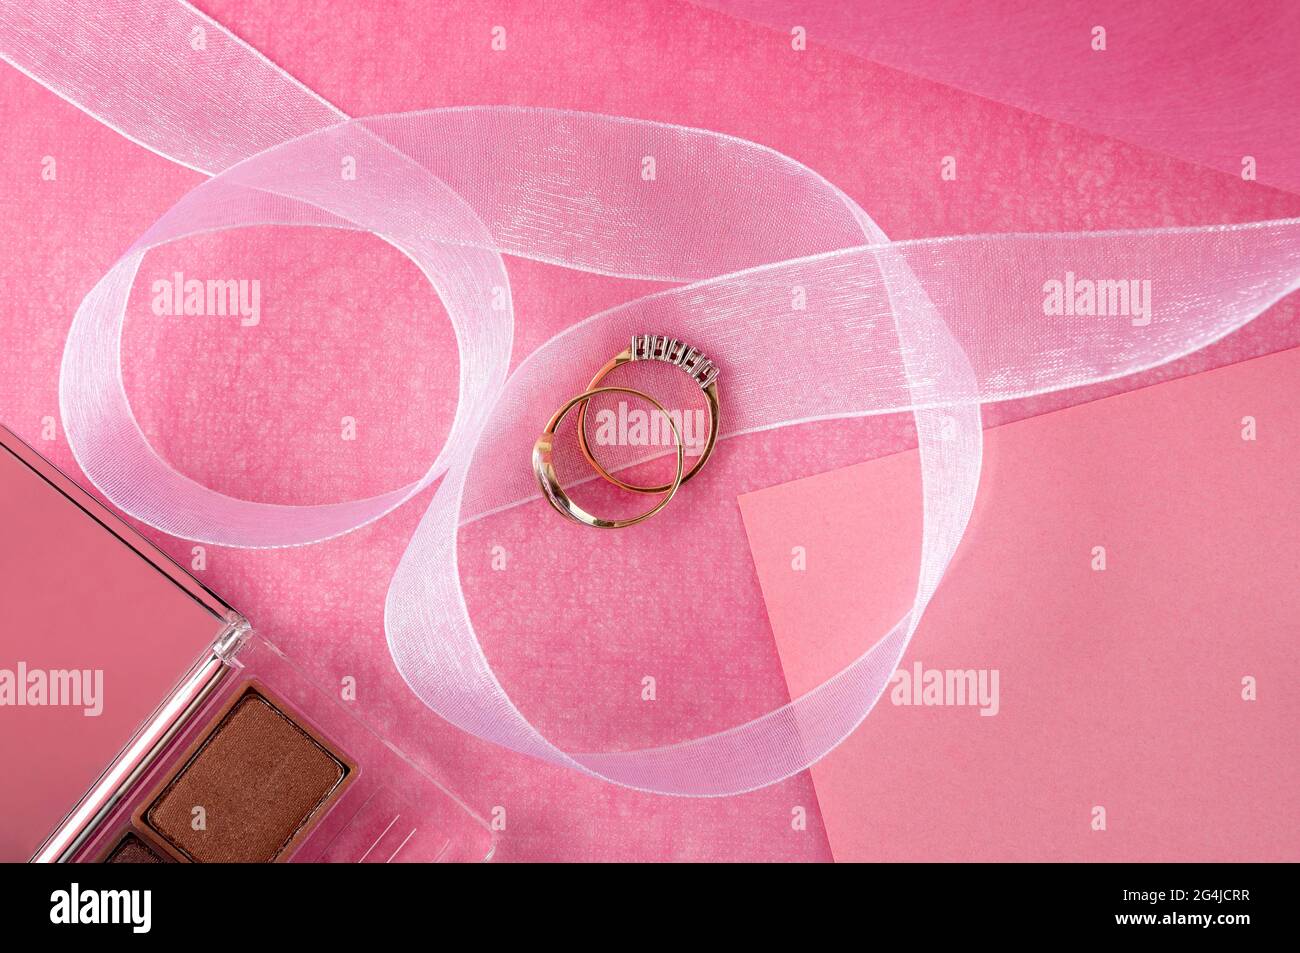 Gold rings lying on a pink table surface. Stock Photo